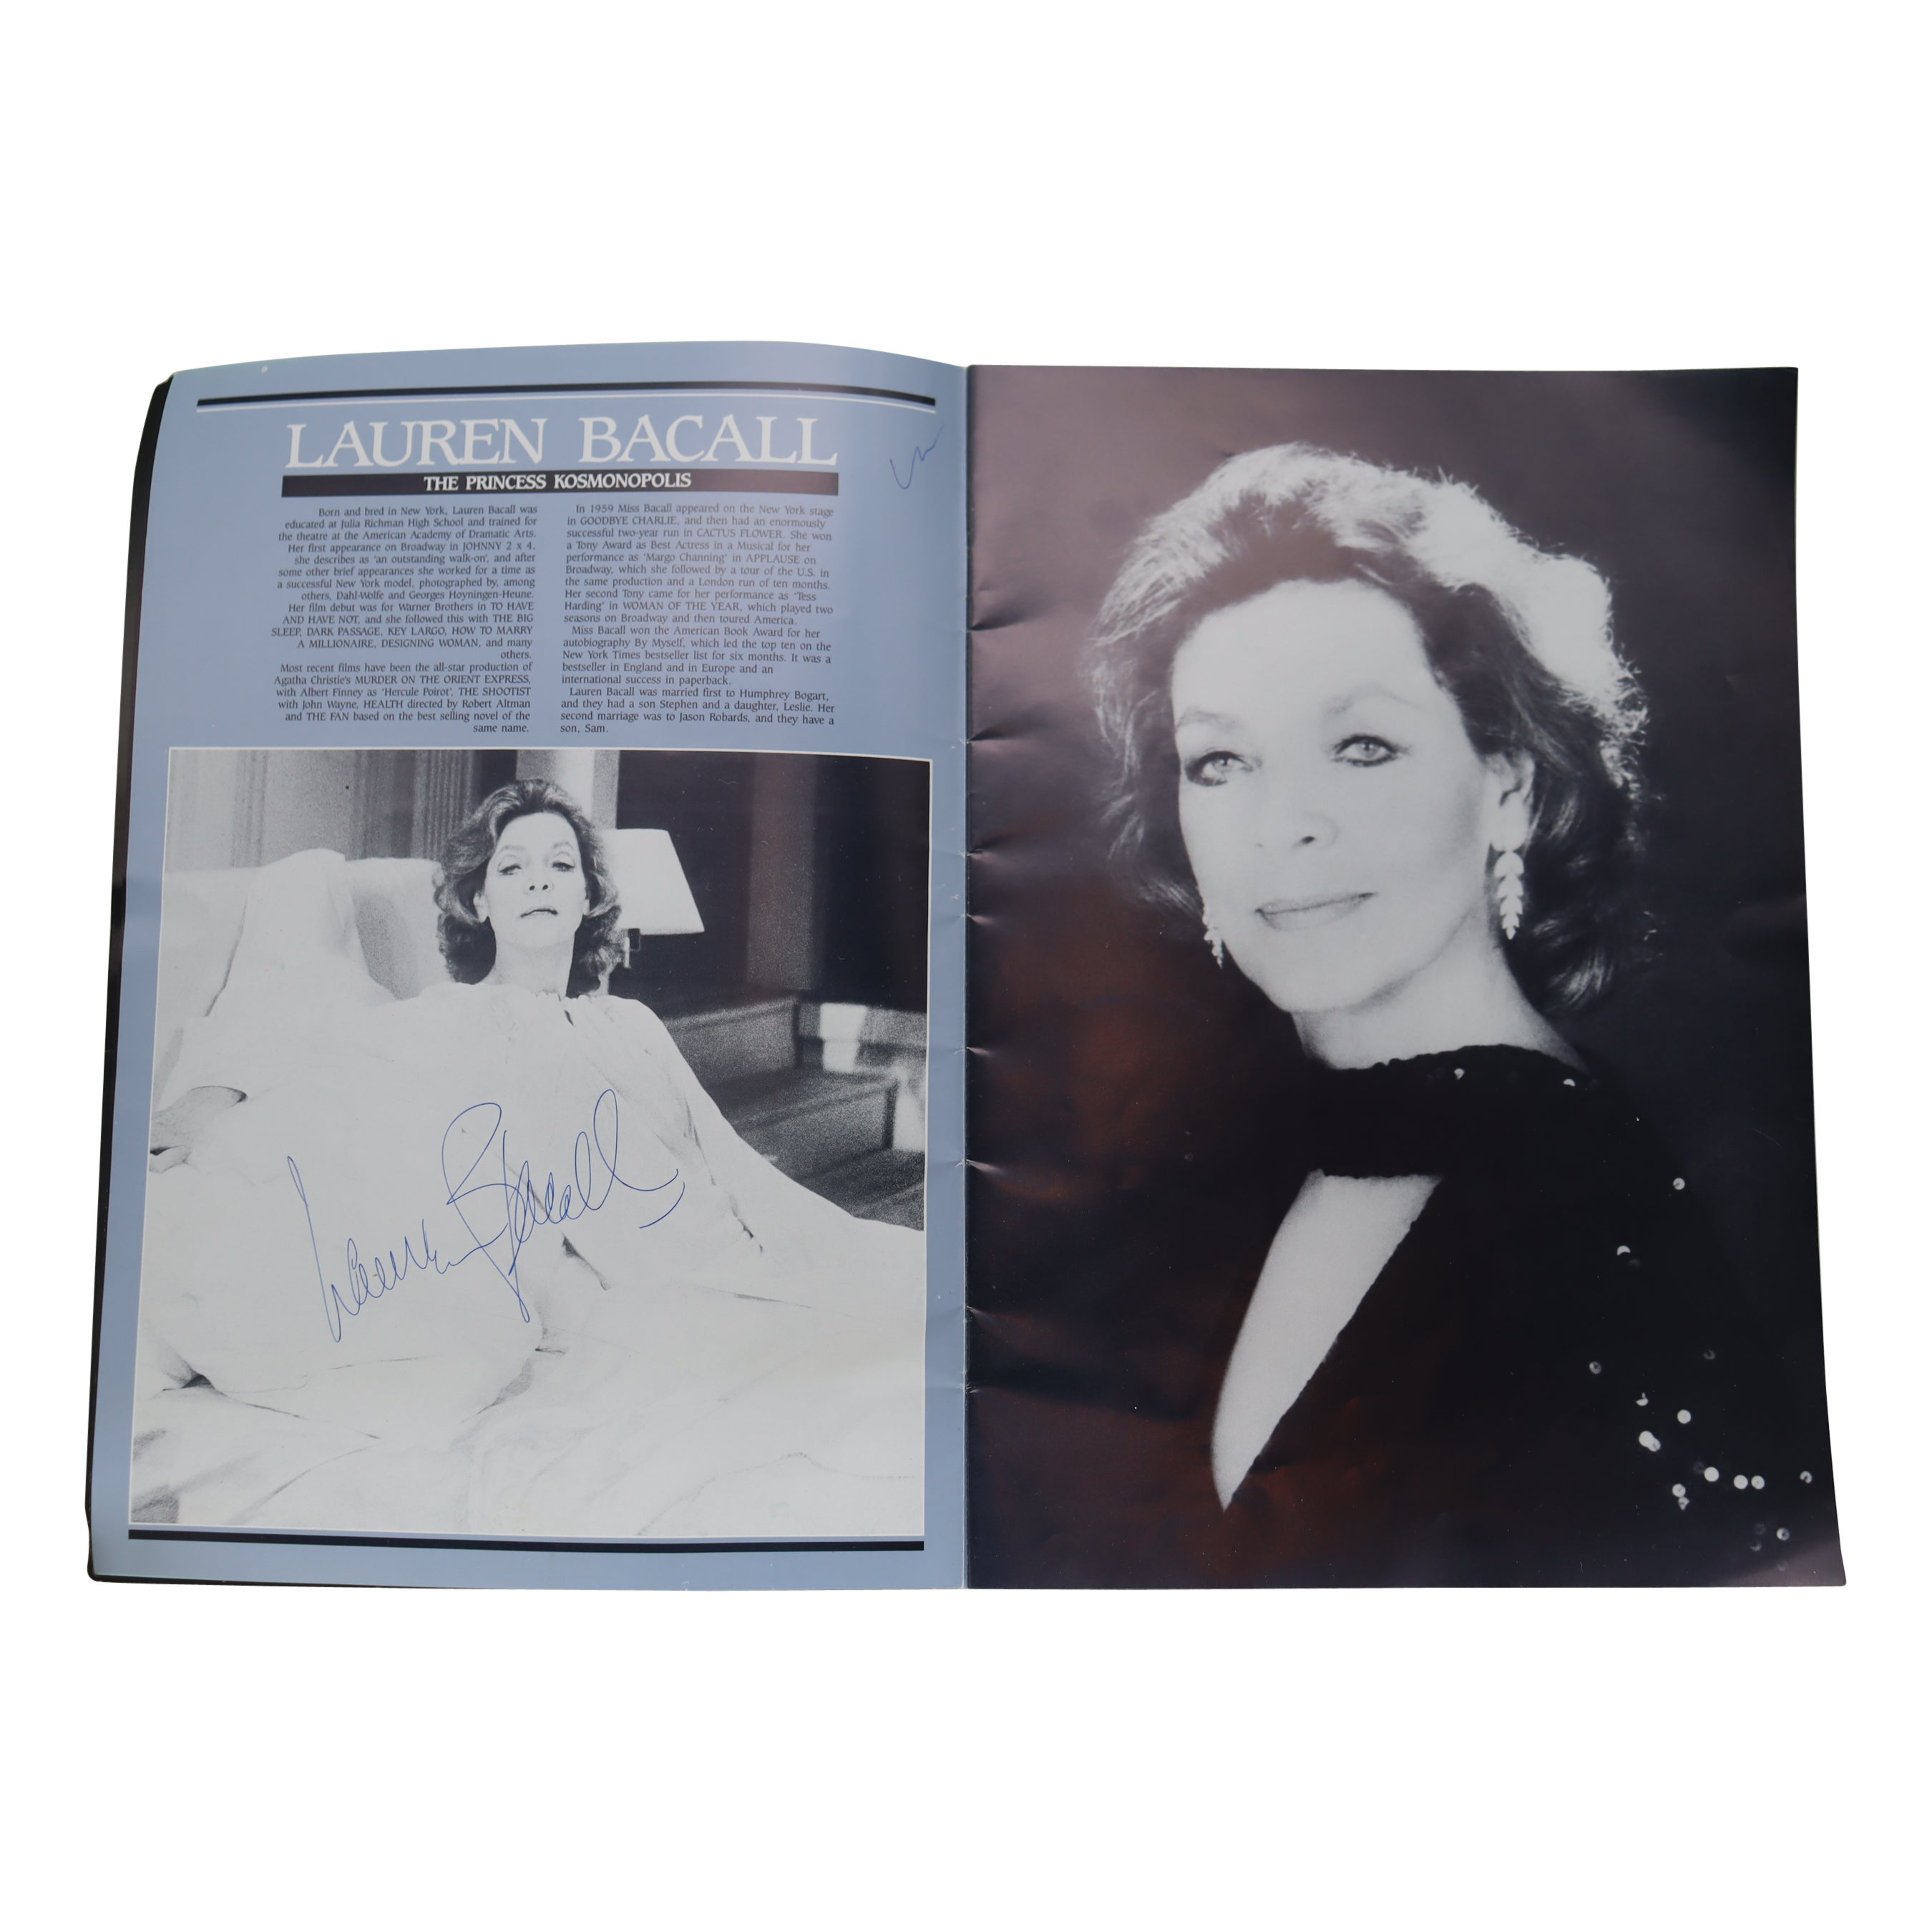 Program Autographed by Lauren Bacall For Sale